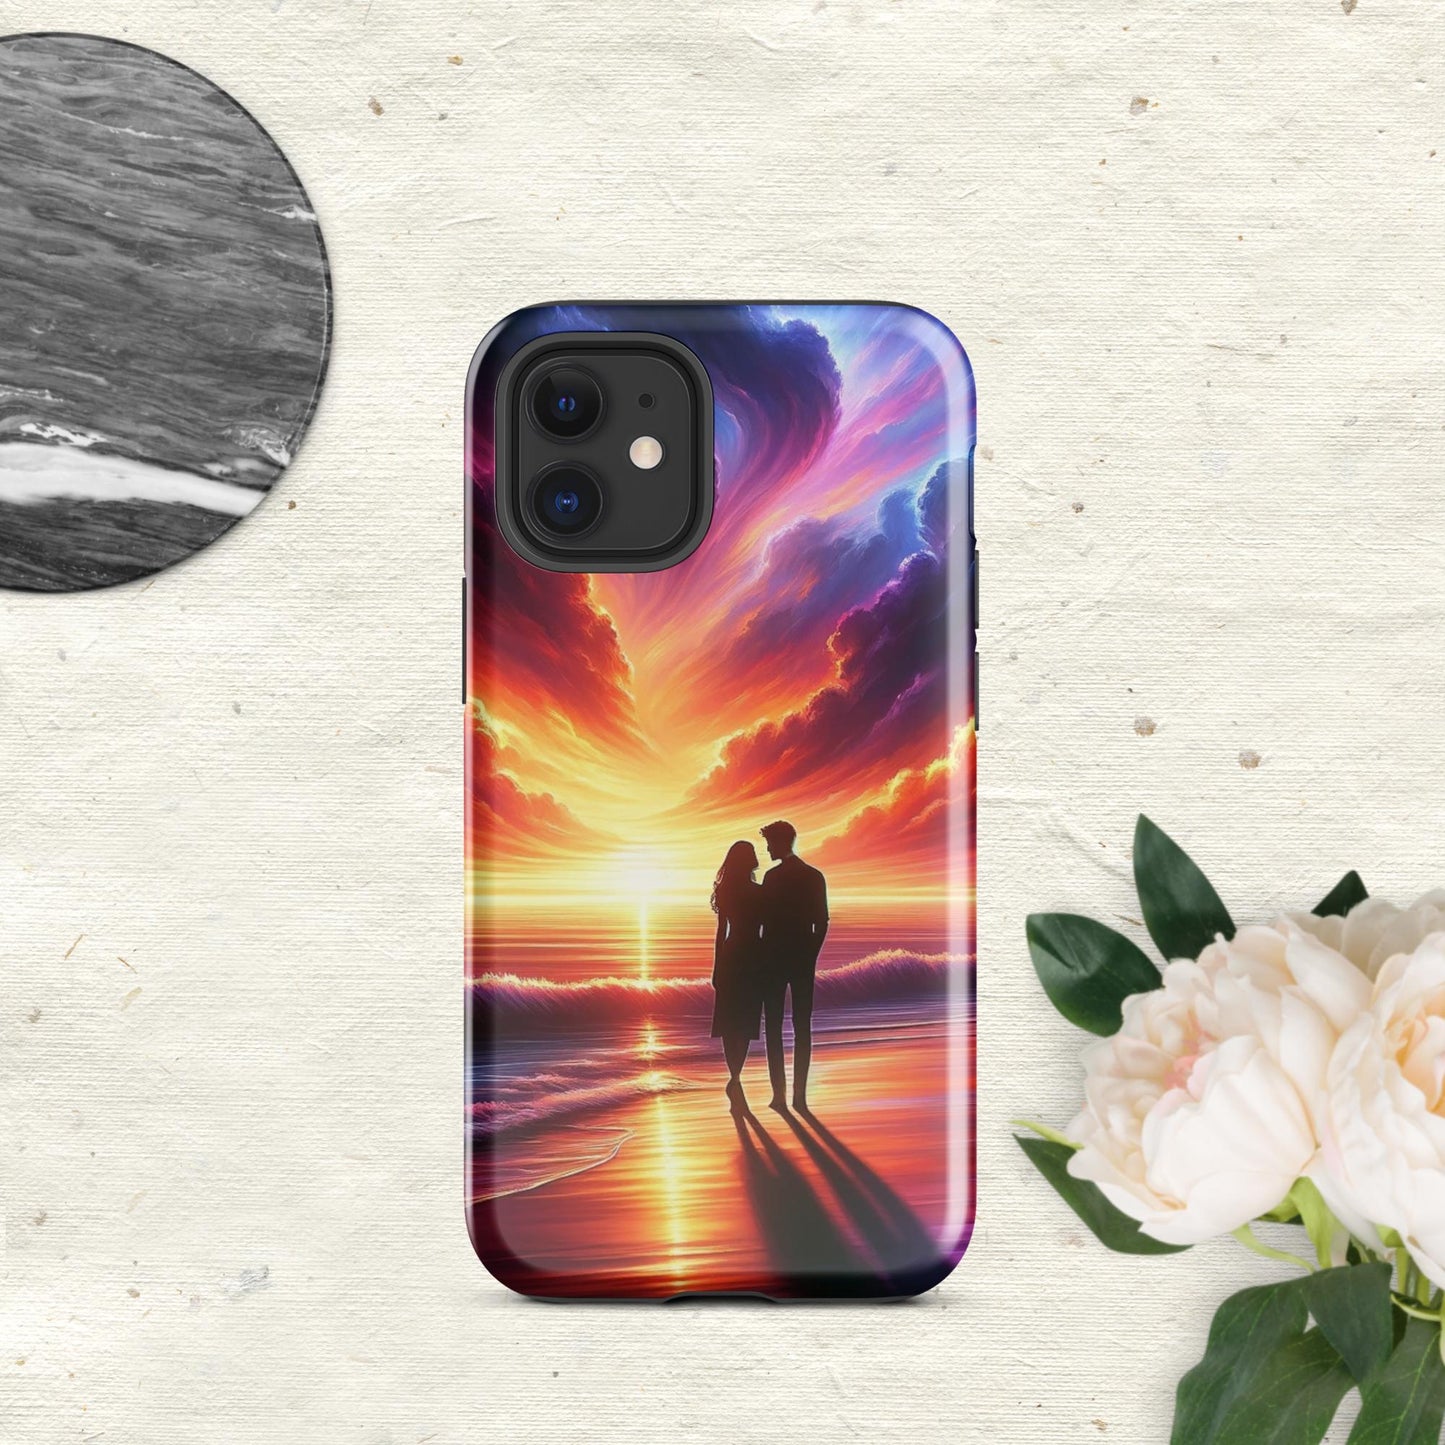 The Hologram Hook Up Glossy / iPhone 12 mini Lovers Sunset Tough Case for iPhone®